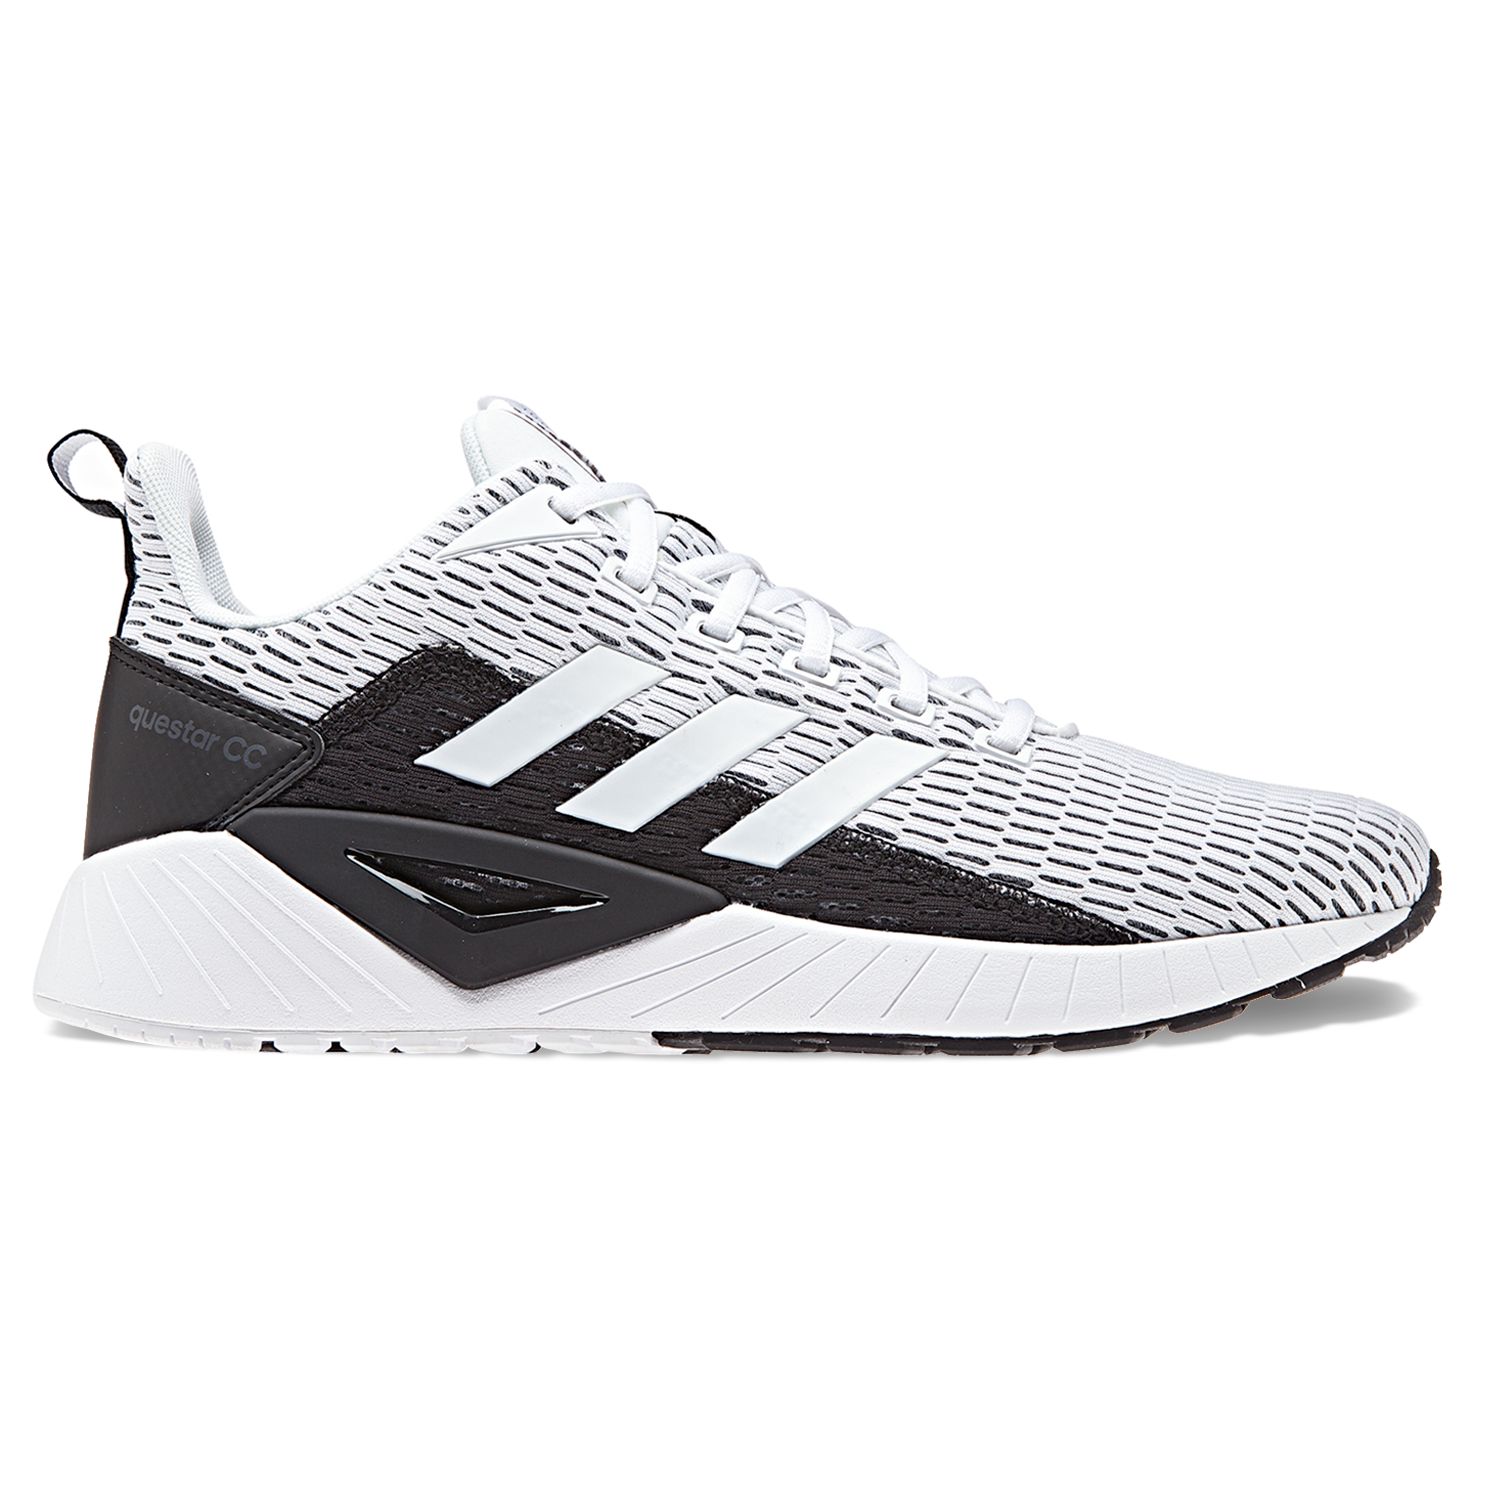 adidas questar climacool review